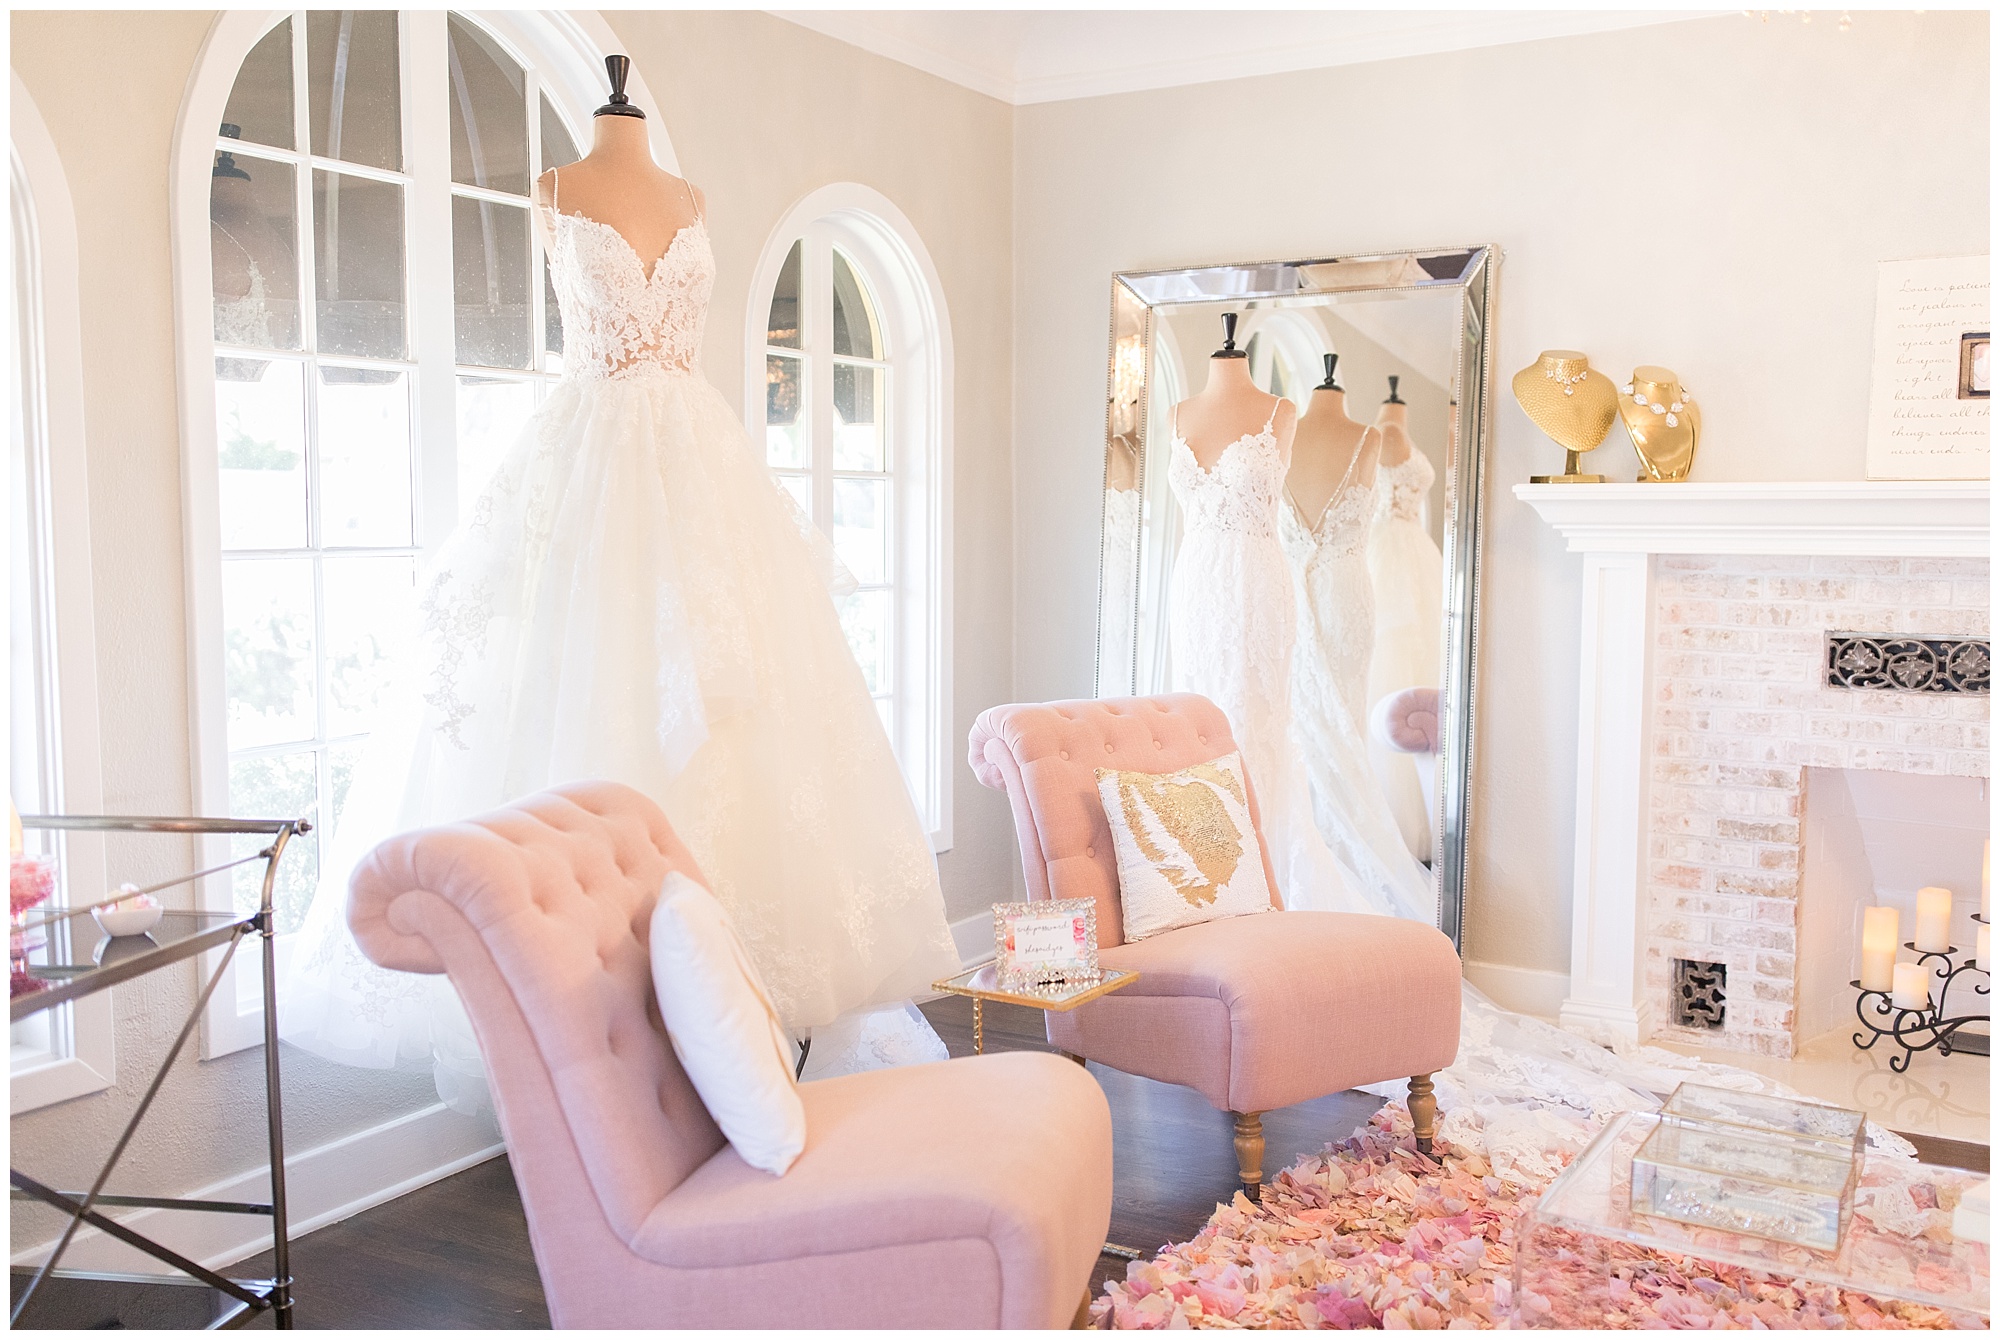 Uptown Bridal Showroom with fireplace